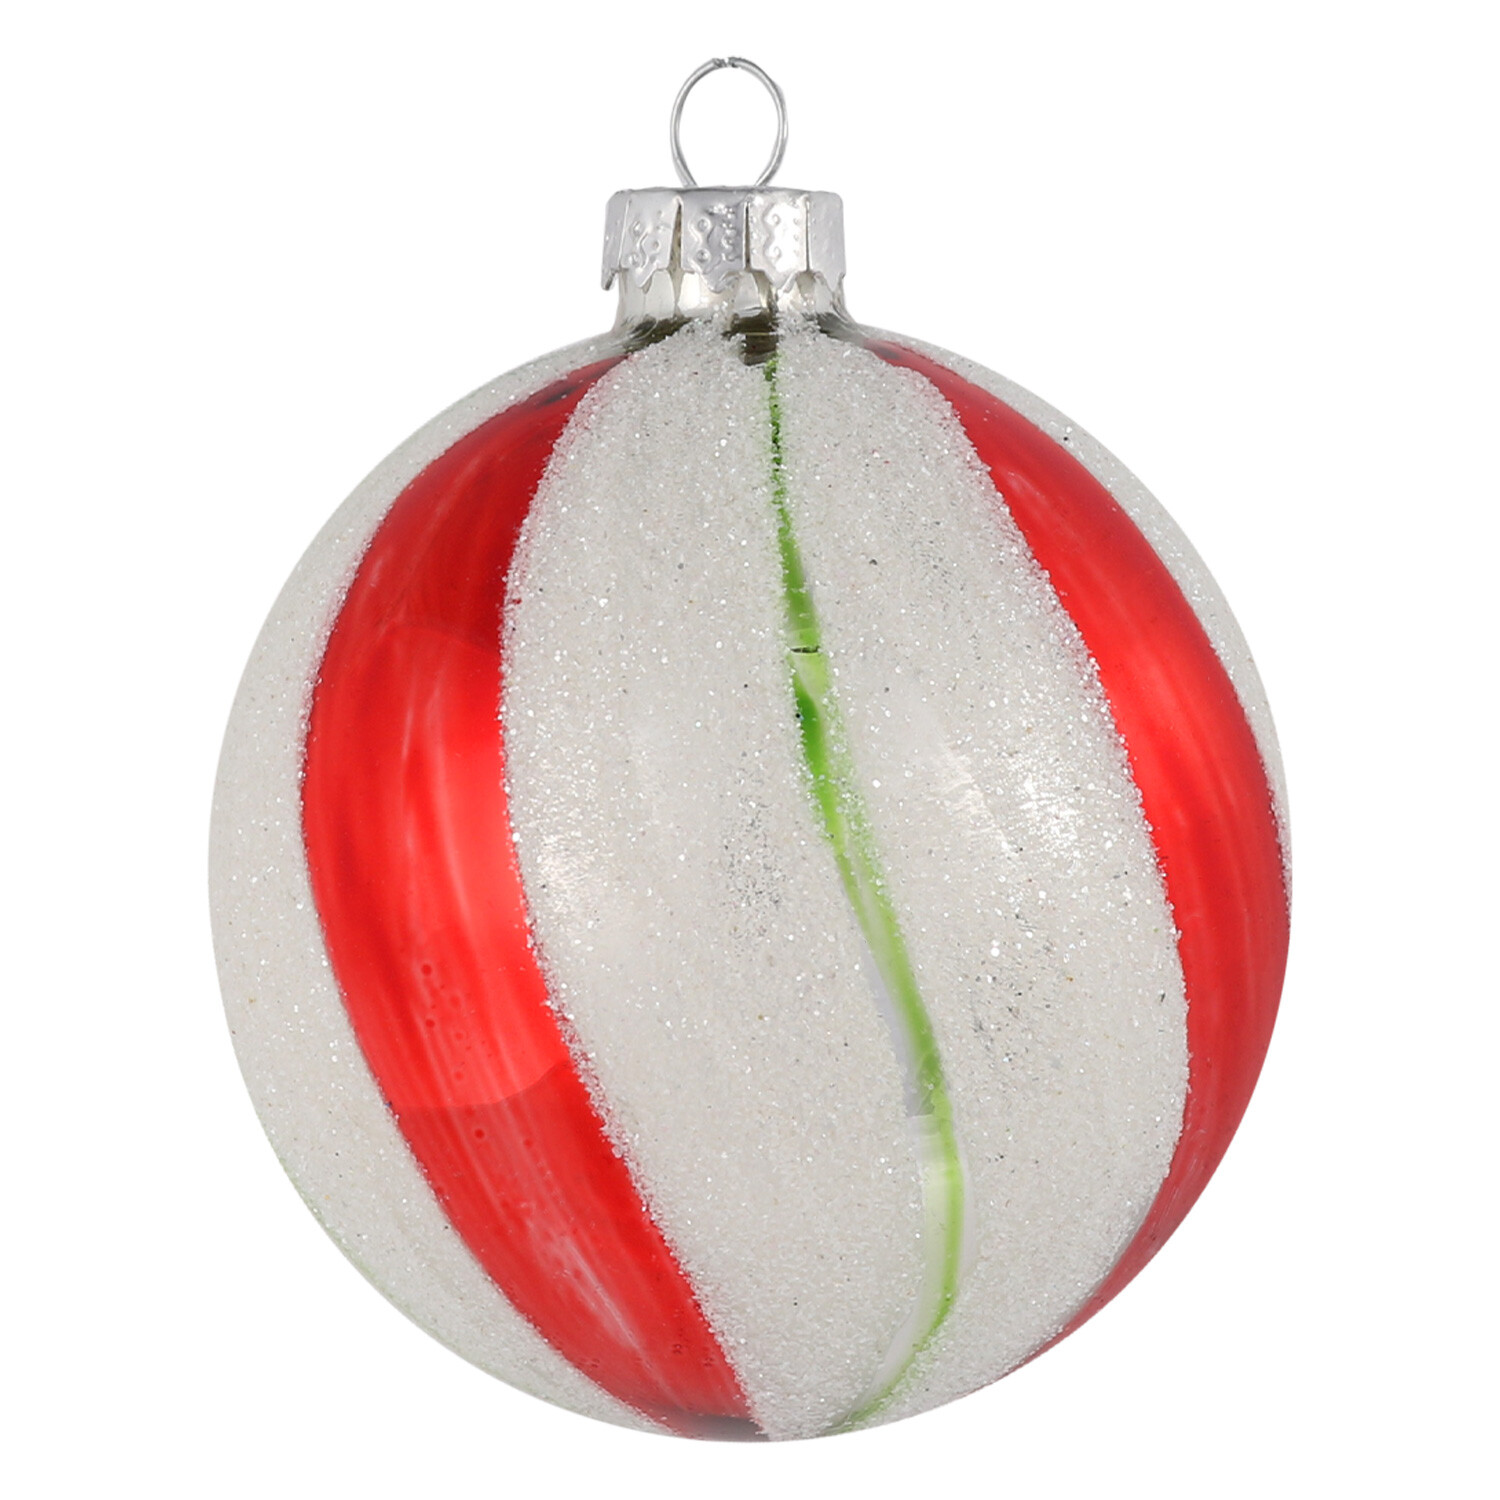 Shiny Peppermint Candy Bauble - White Image